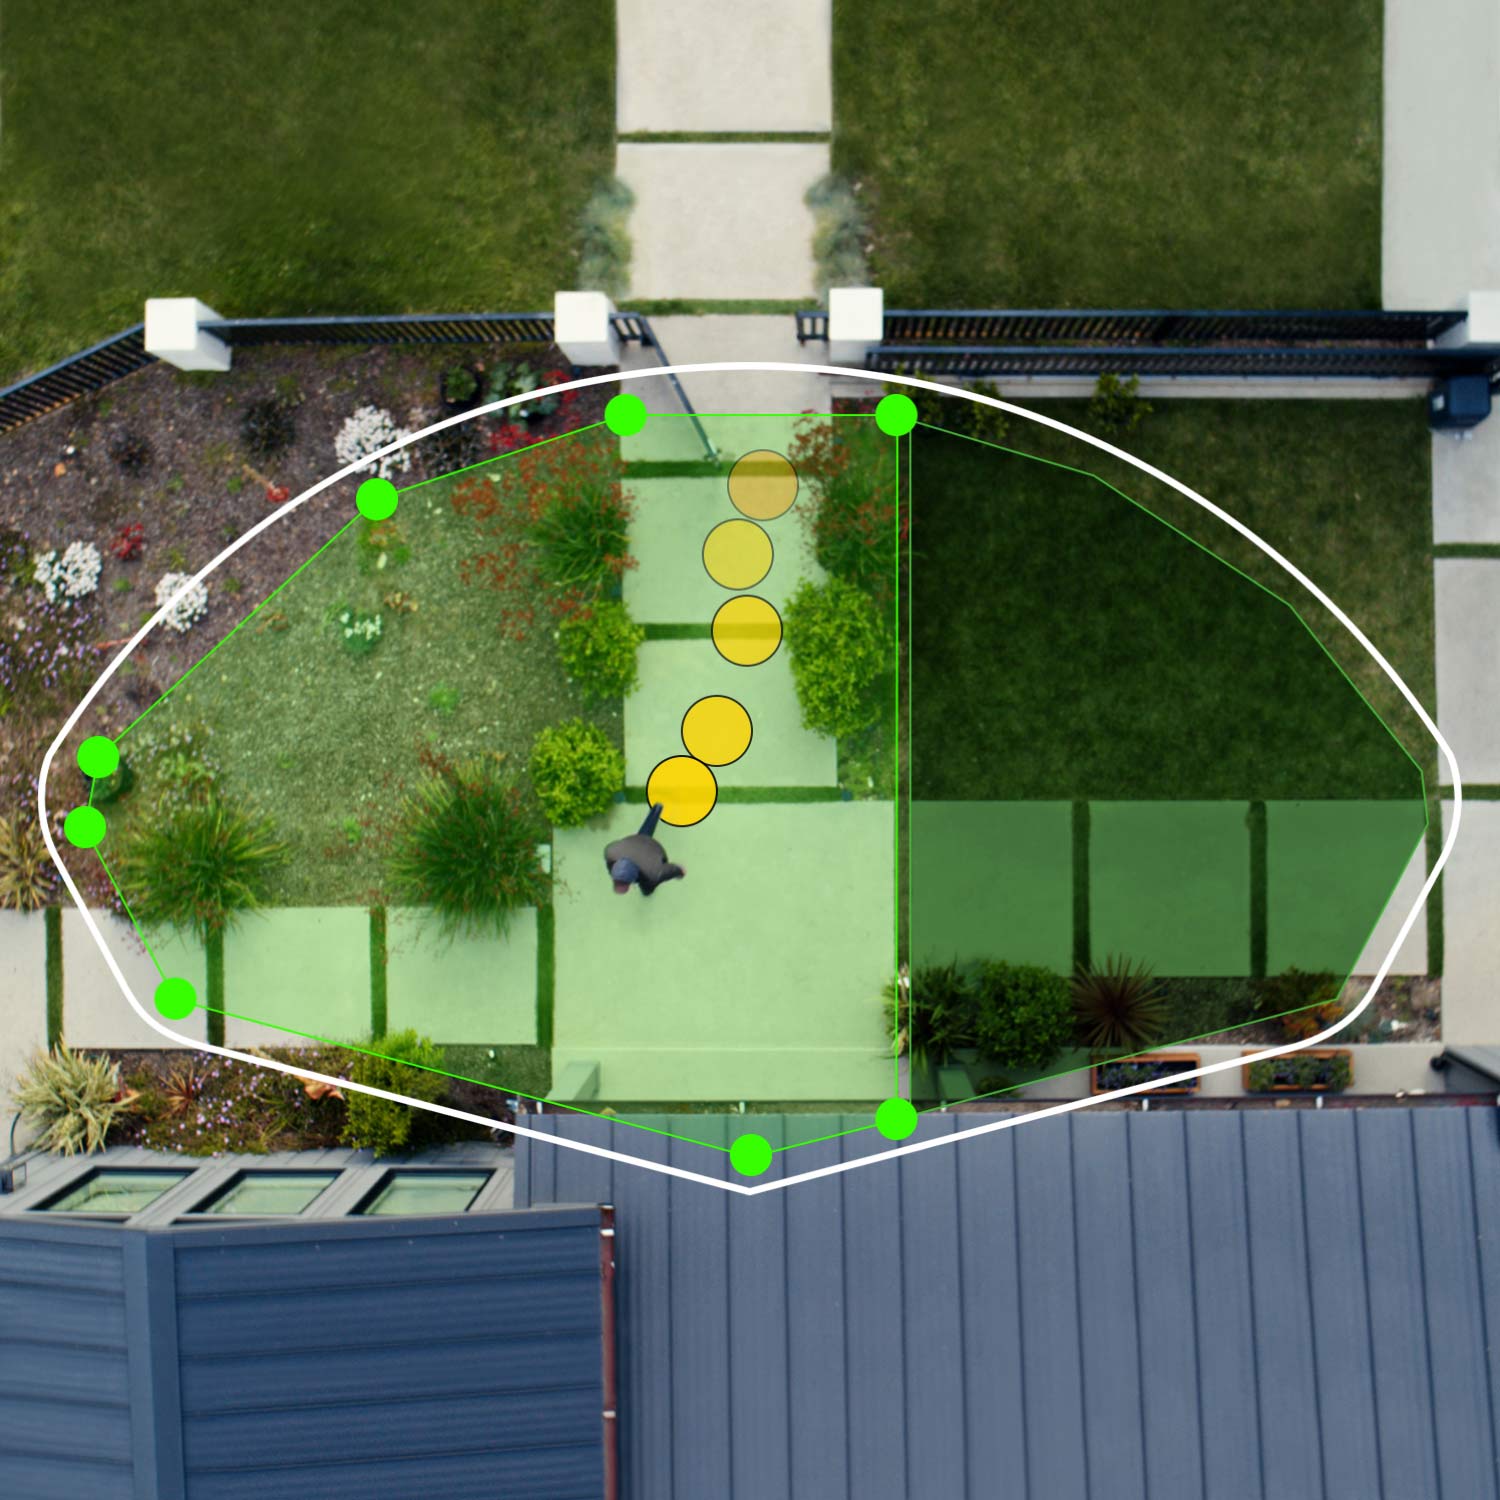 Wired Doorbell Pro (Formerly: Video Doorbell Pro 2) - Aerial view of front of house showing bird's eye view zones in green. Person walks toward front door, their path indicated by yellow dots.